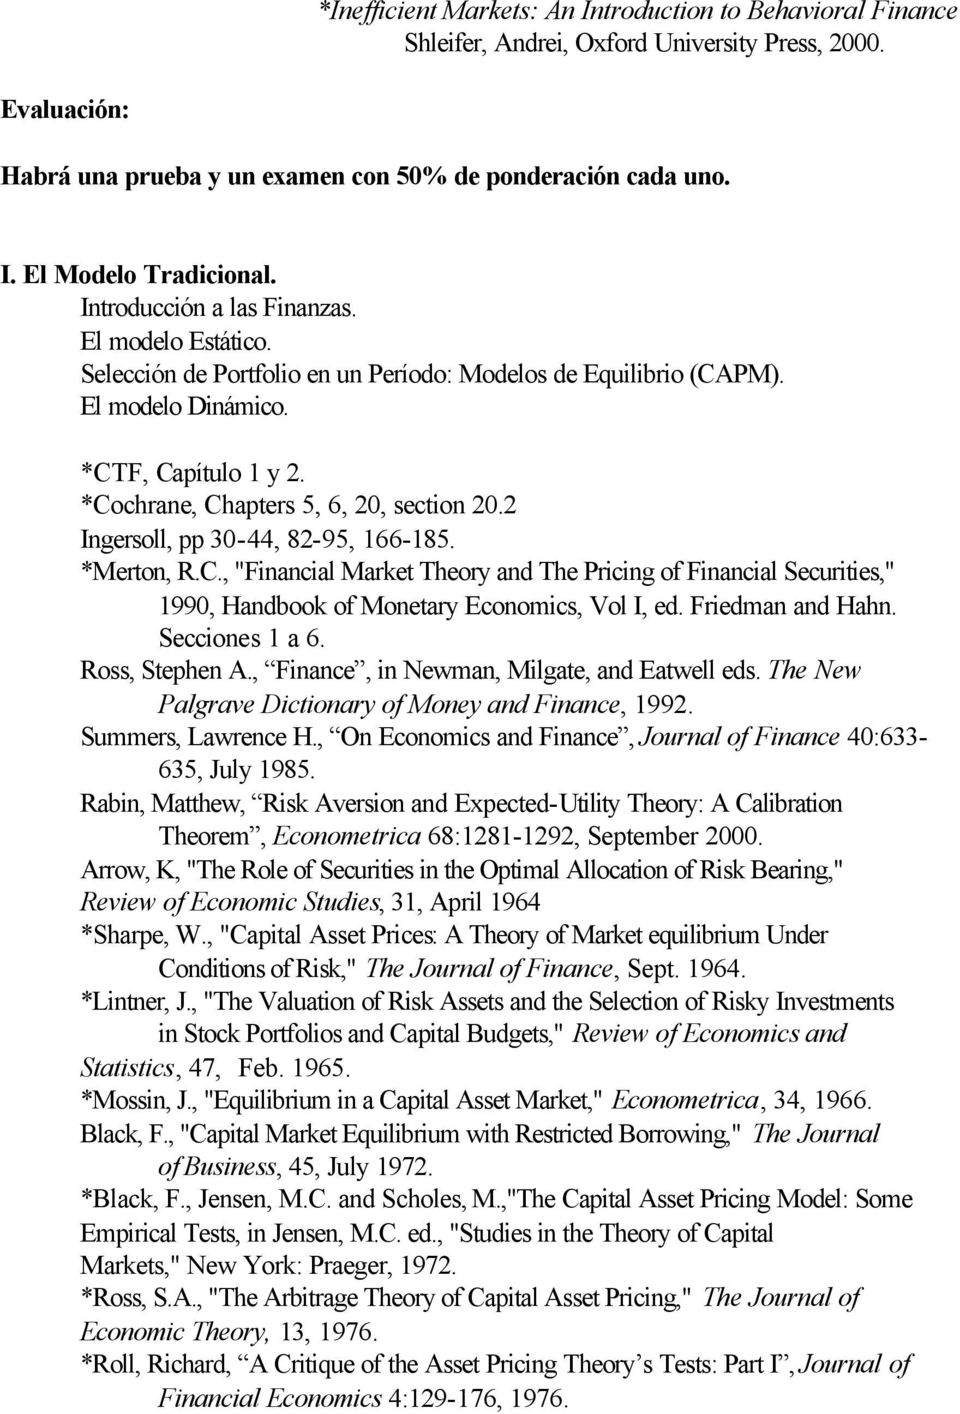 2 Ingersoll, pp 30-44, 82-95, 166-185. *Merton, R.C., "Financial Market Theory and The Pricing of Financial Securities," 1990, Handbook of Monetary Economics, Vol I, ed. Friedman and Hahn.